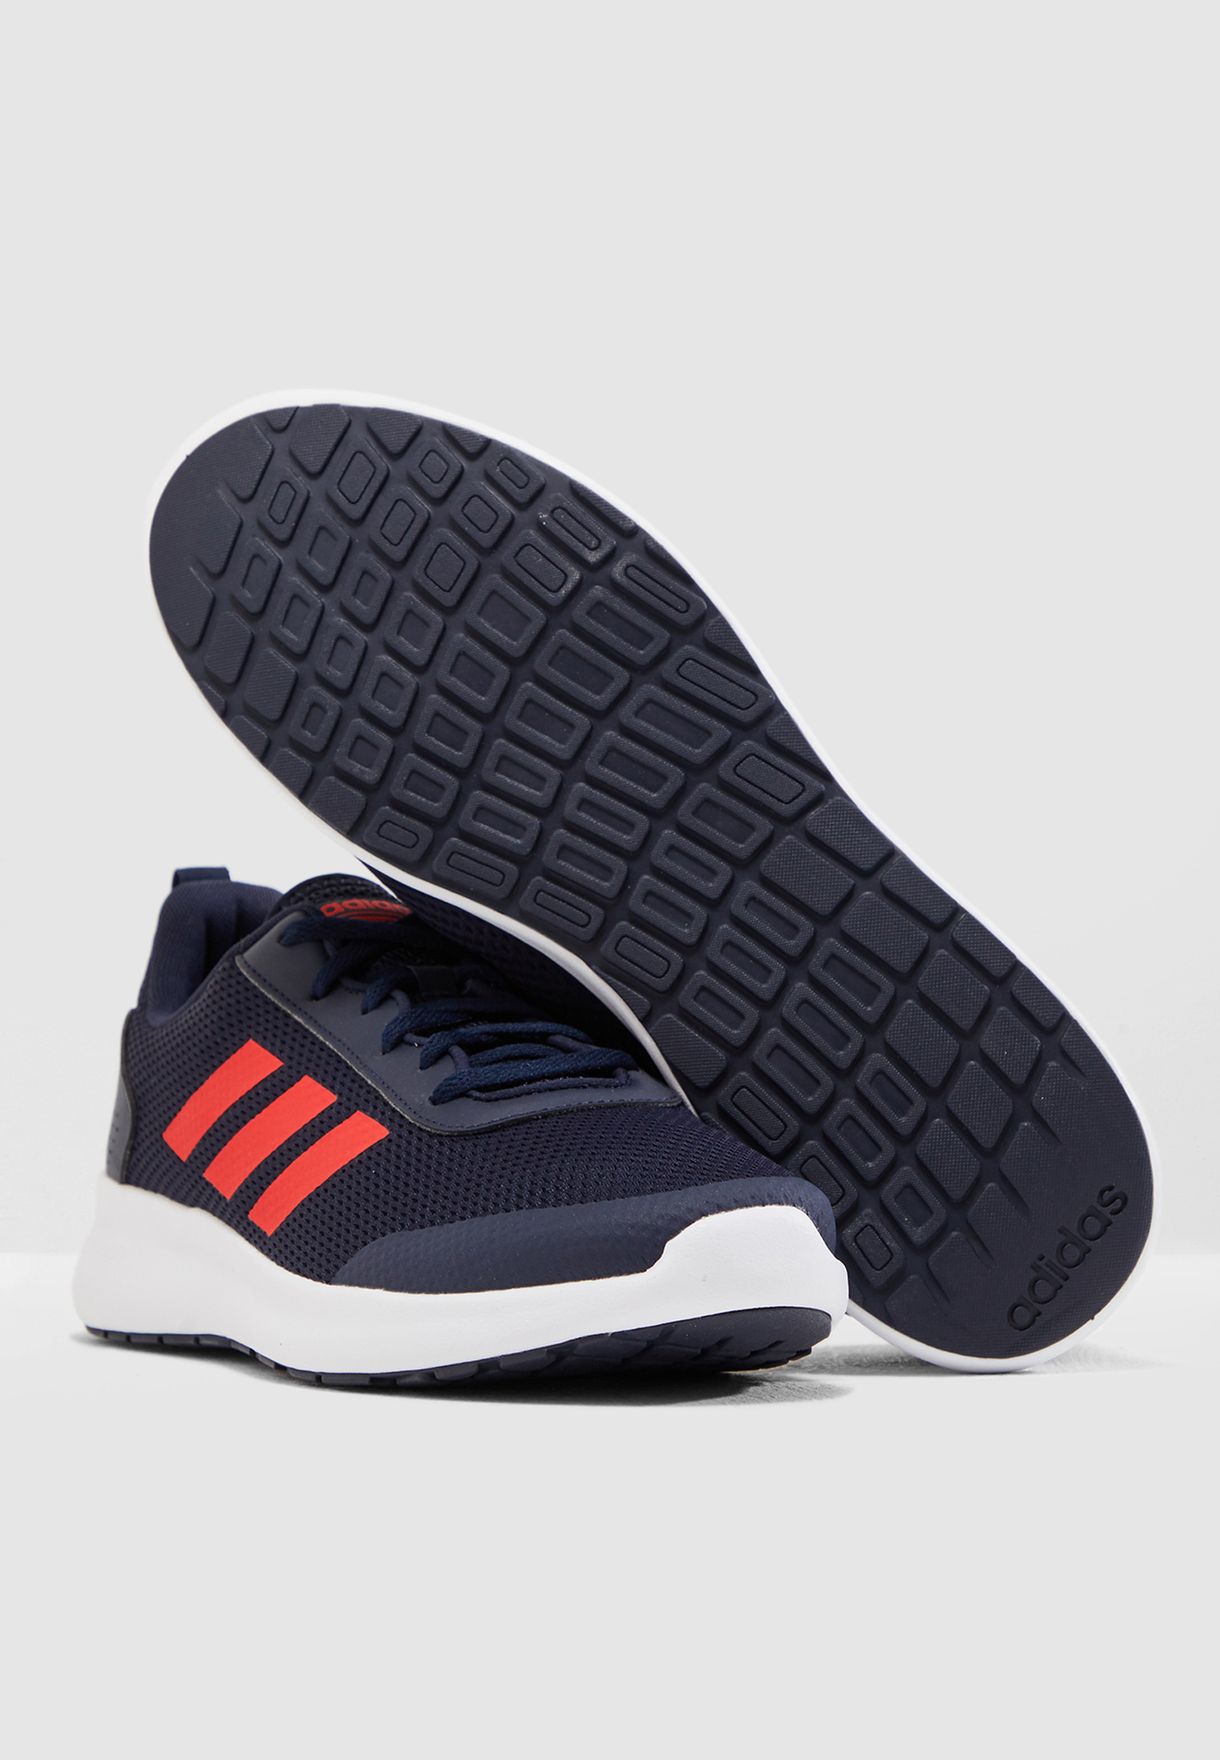 adidas argecy running shoe review